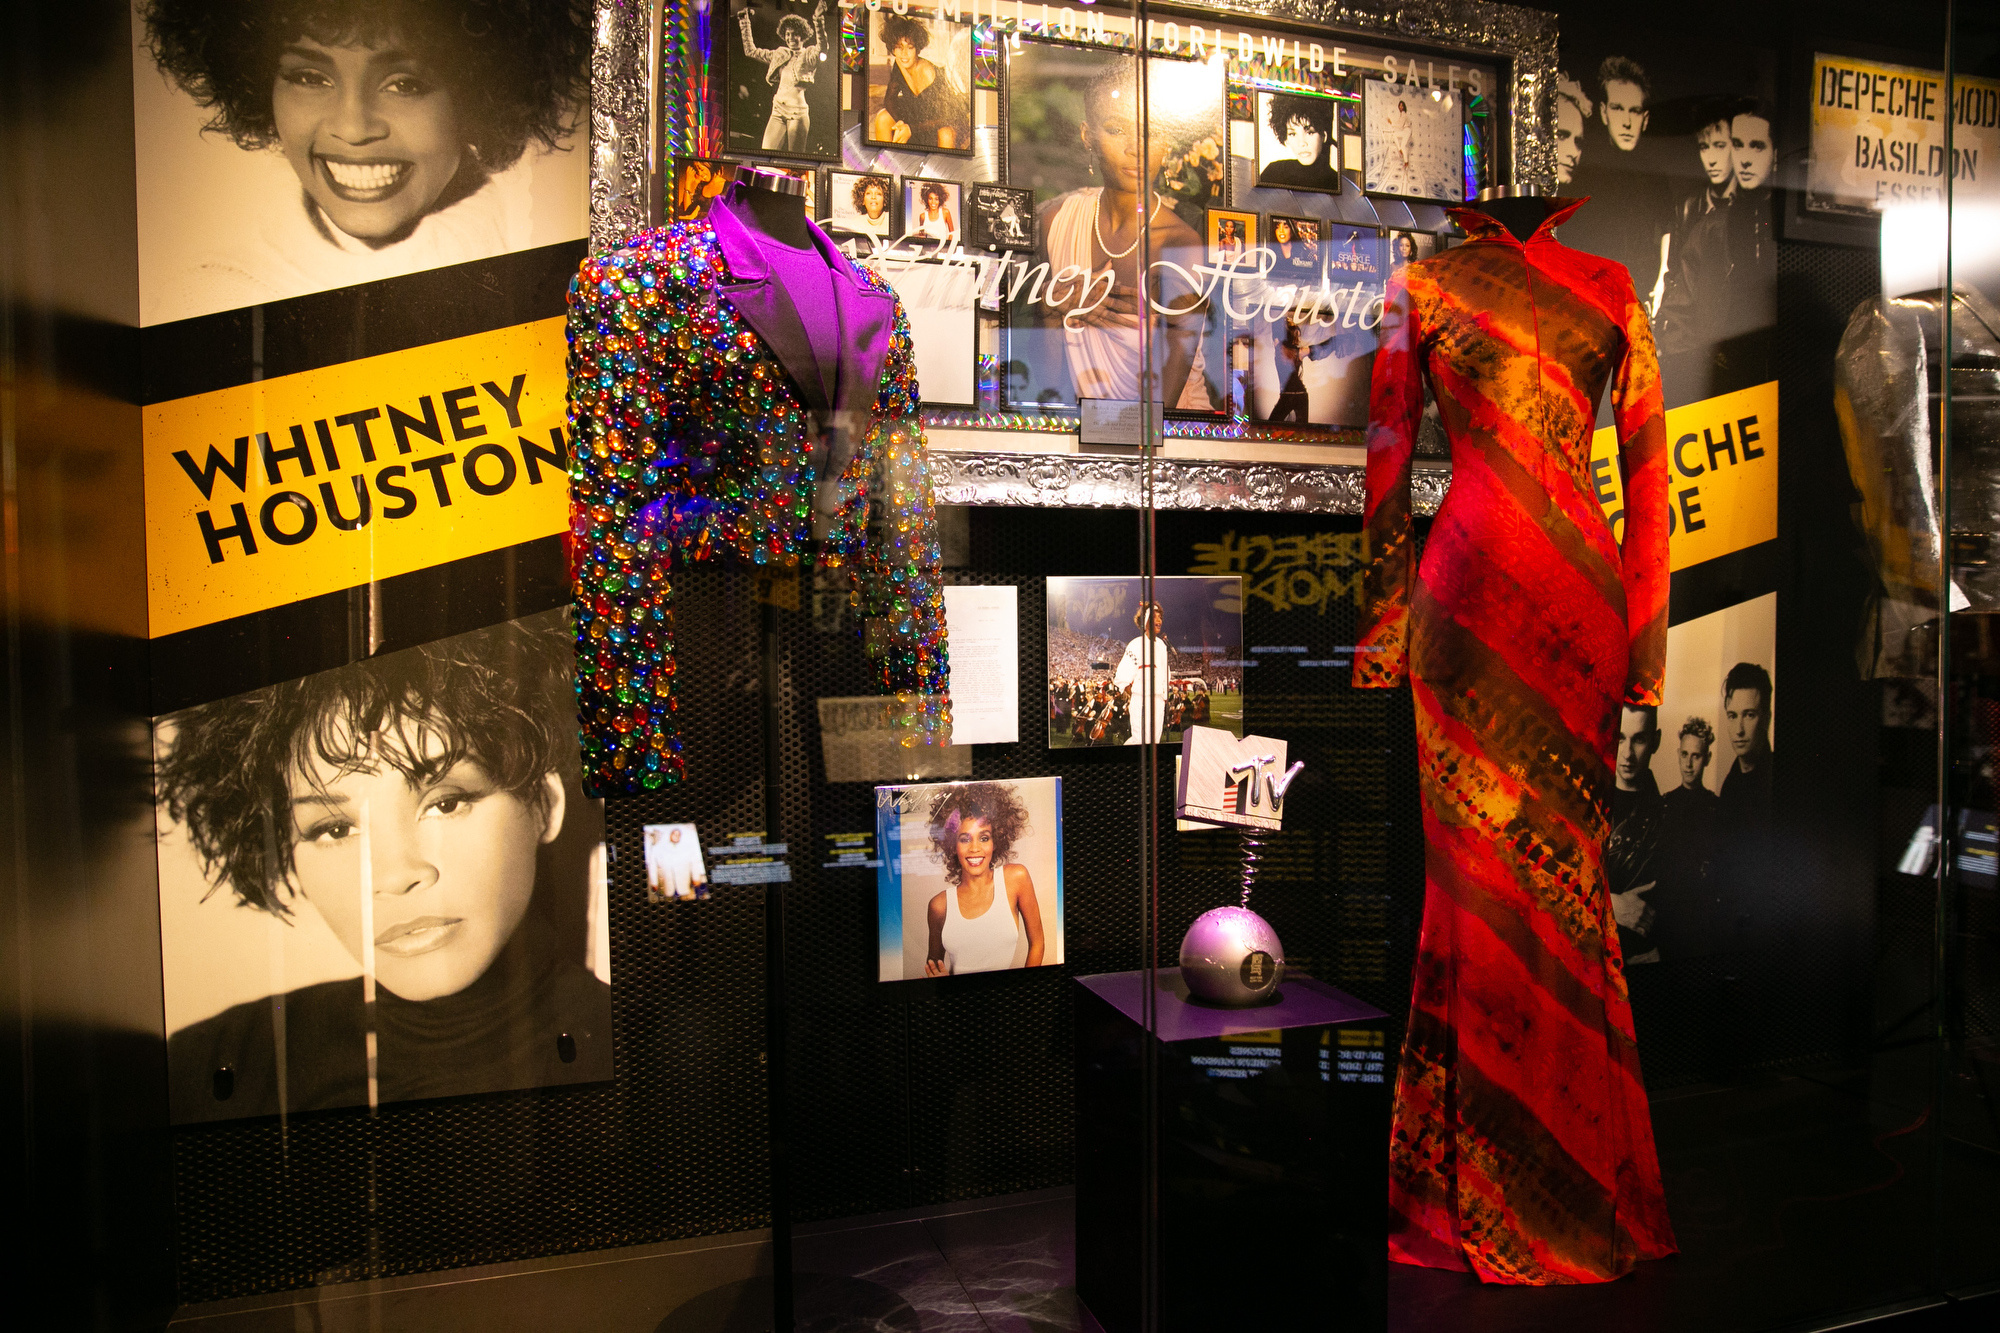 Rock and Roll Hall of Fame, Inductees exhibit, Music history showcase, Notable artists, 2000x1340 HD Desktop